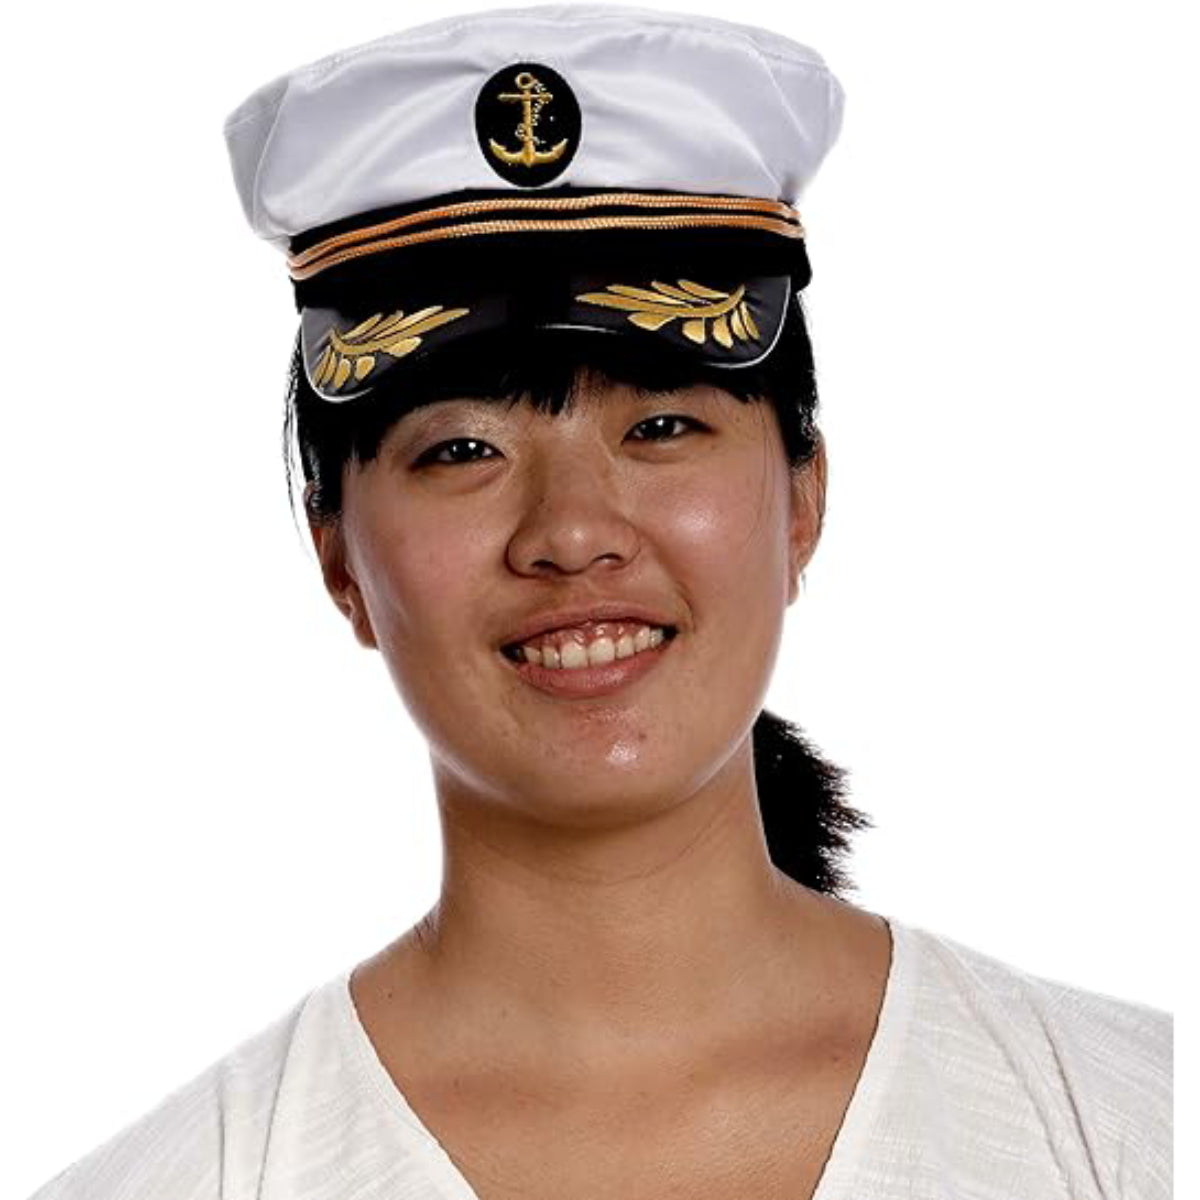 Captain's Hat Ship Yacht Sailor Various Designs Funny Halloween Costume Cosplay Accessory Standard